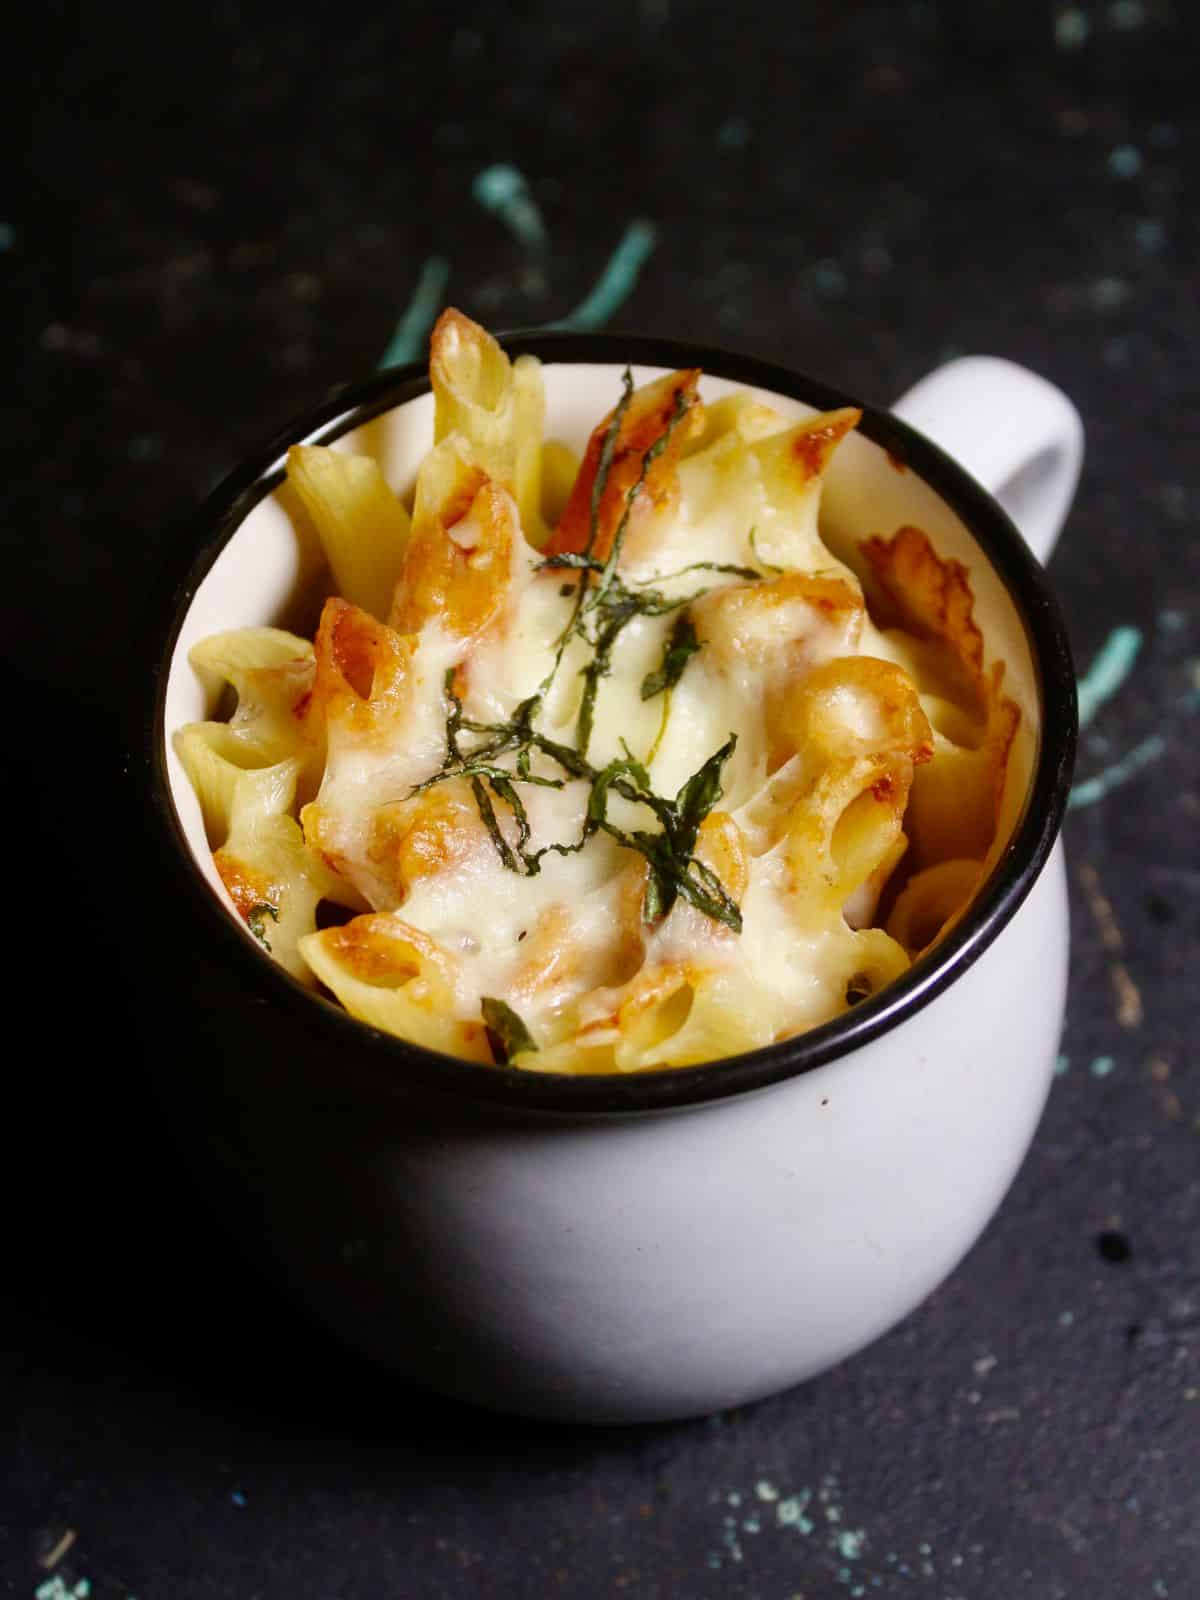 Hot Baked Penne Pasta in a Cup ready to enjoy 